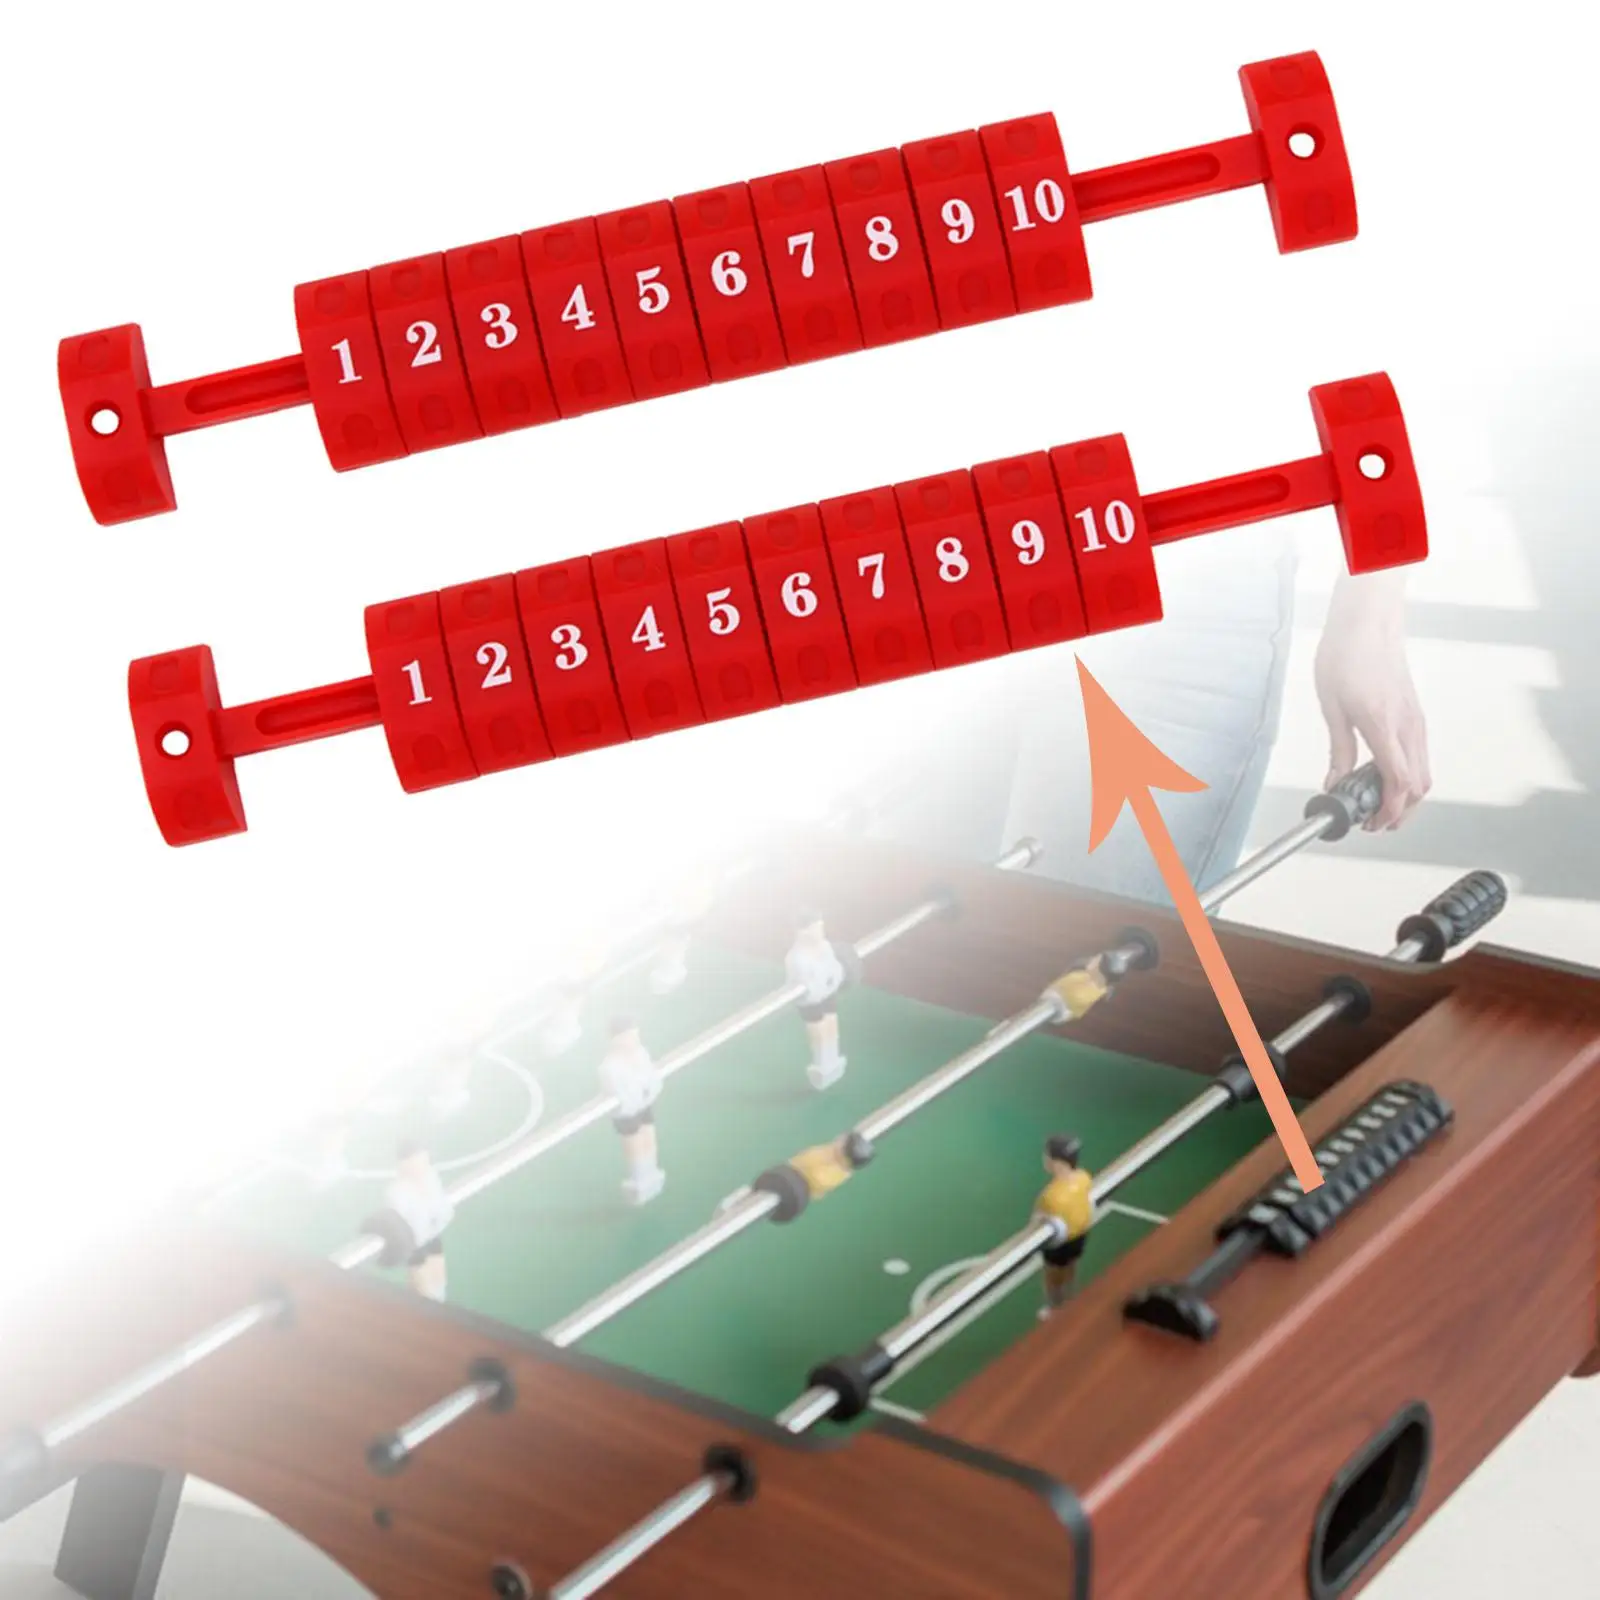 2x Universal Foosball Counter Scoring Units  Keepers Standard Foosball Tables Football Machine Accessories  Game